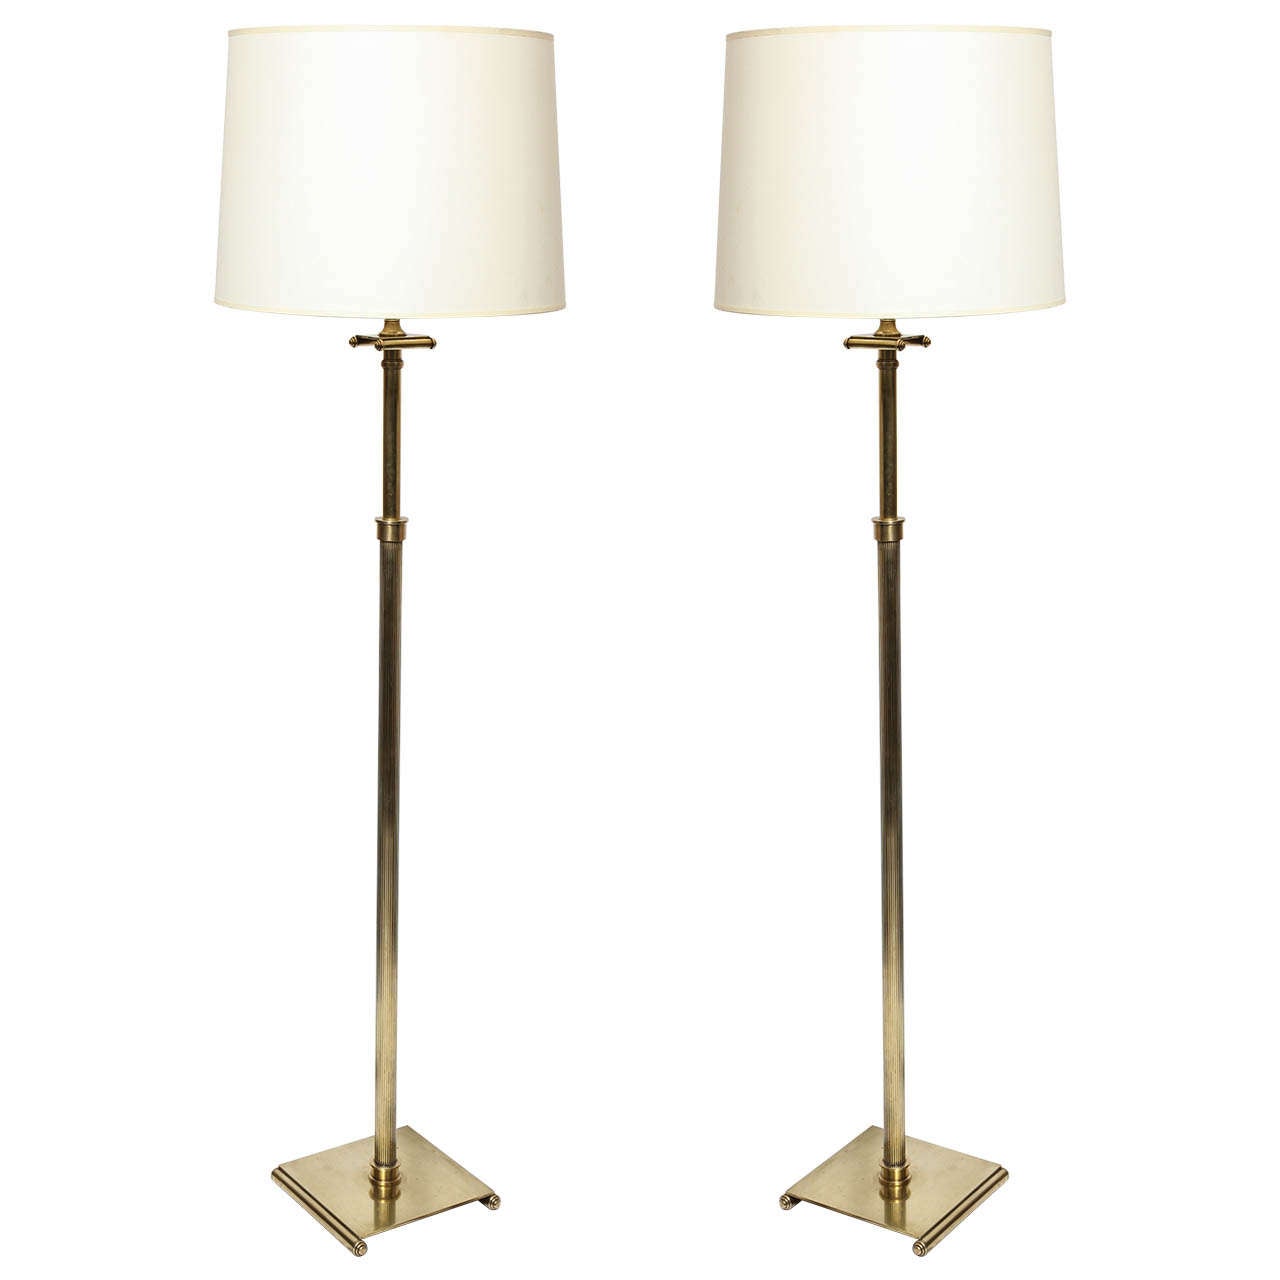 A Pair of 1930's Classical Modern Floor Lamps attributed to Walter Kantack